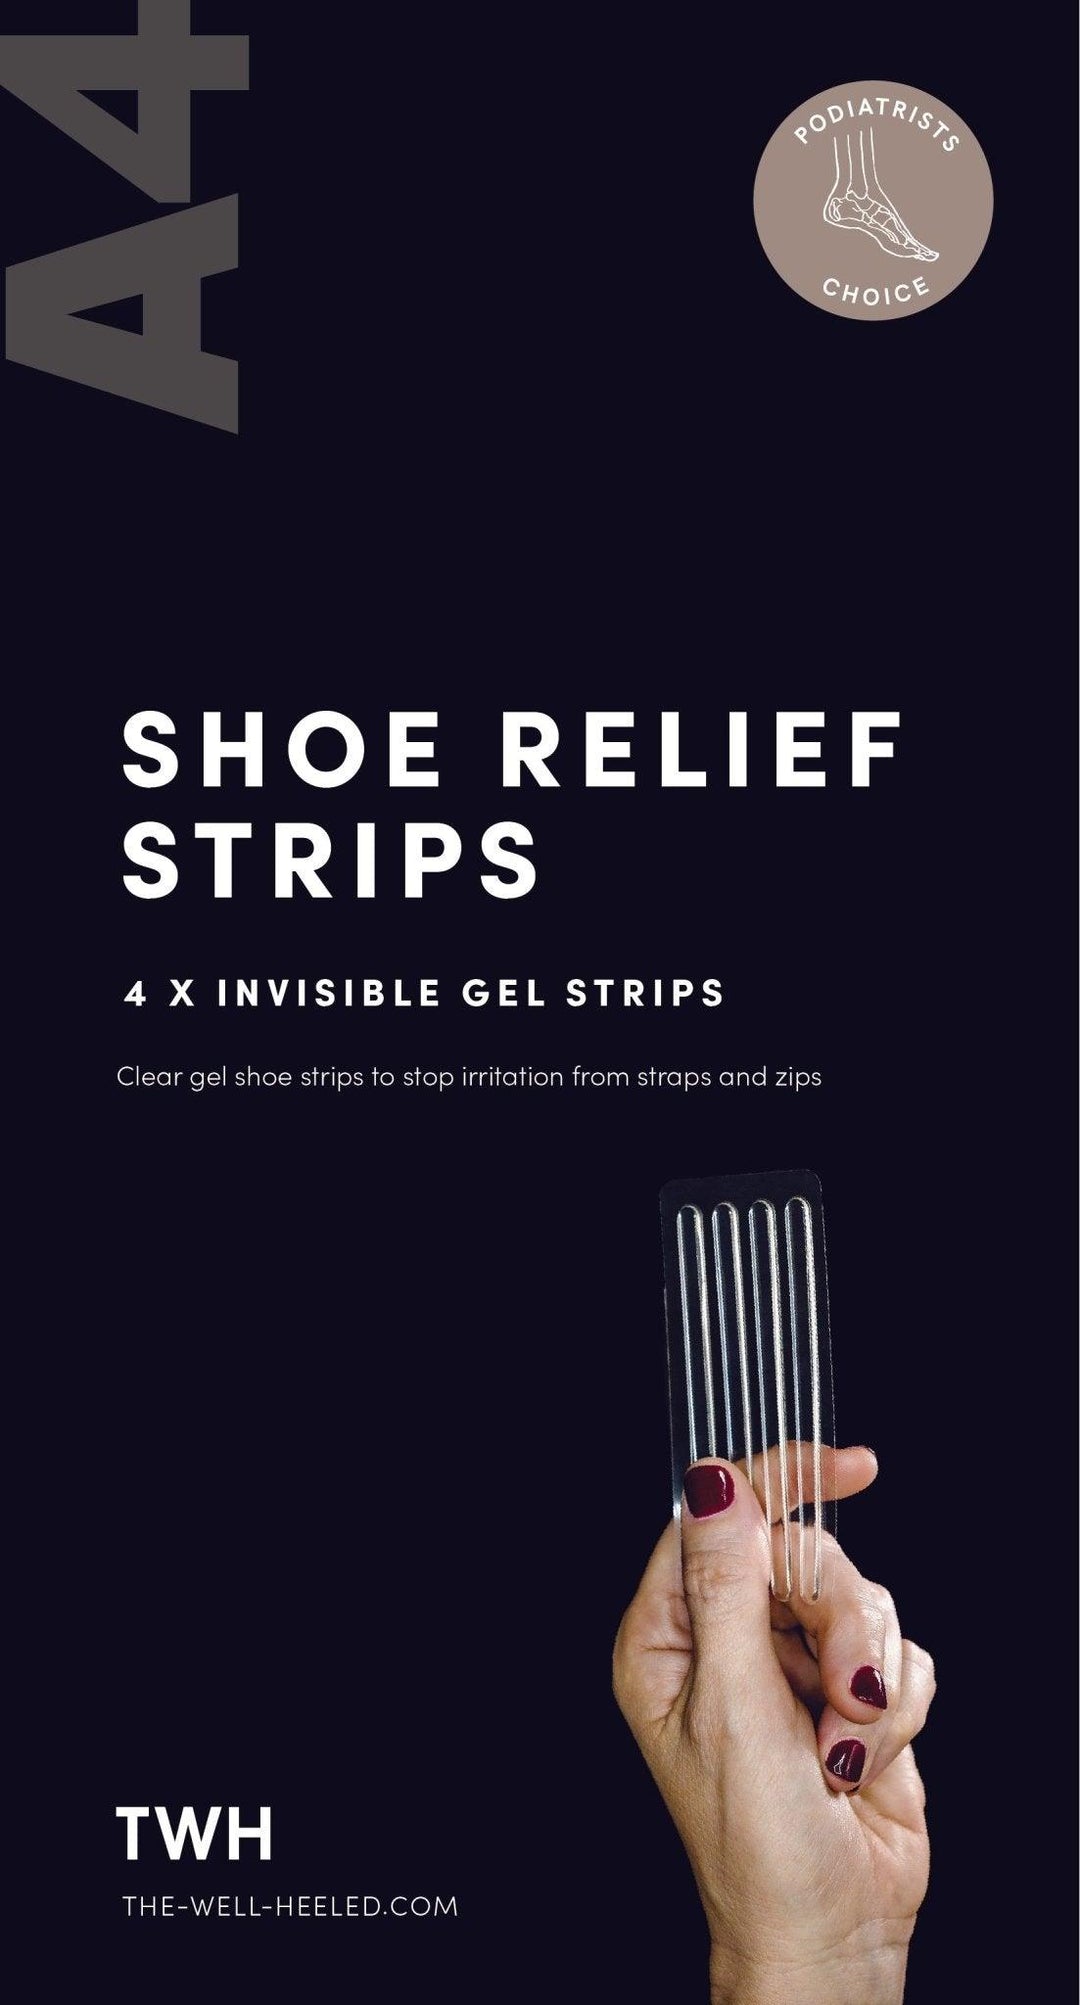 A4 Shoe Relief Strips - The Foot Care Shop